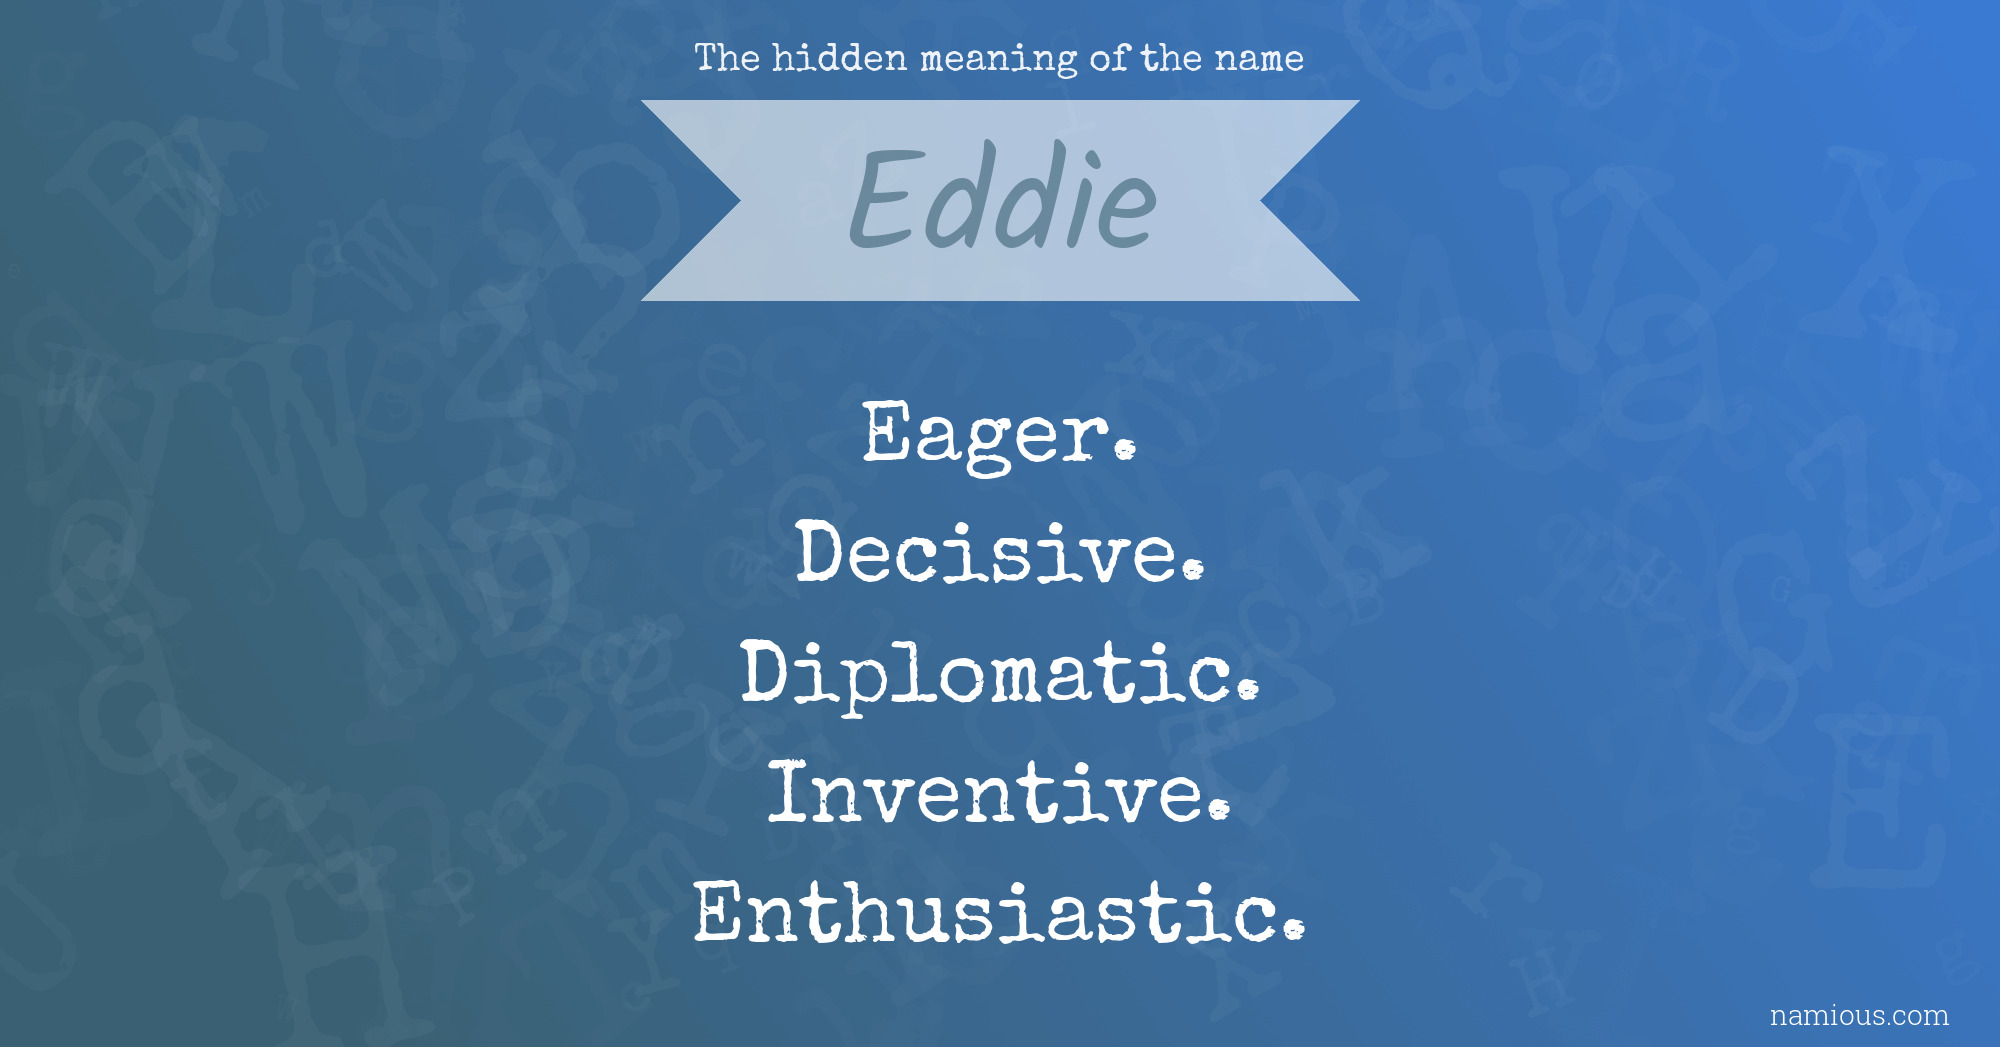 The hidden meaning of the name Eddie